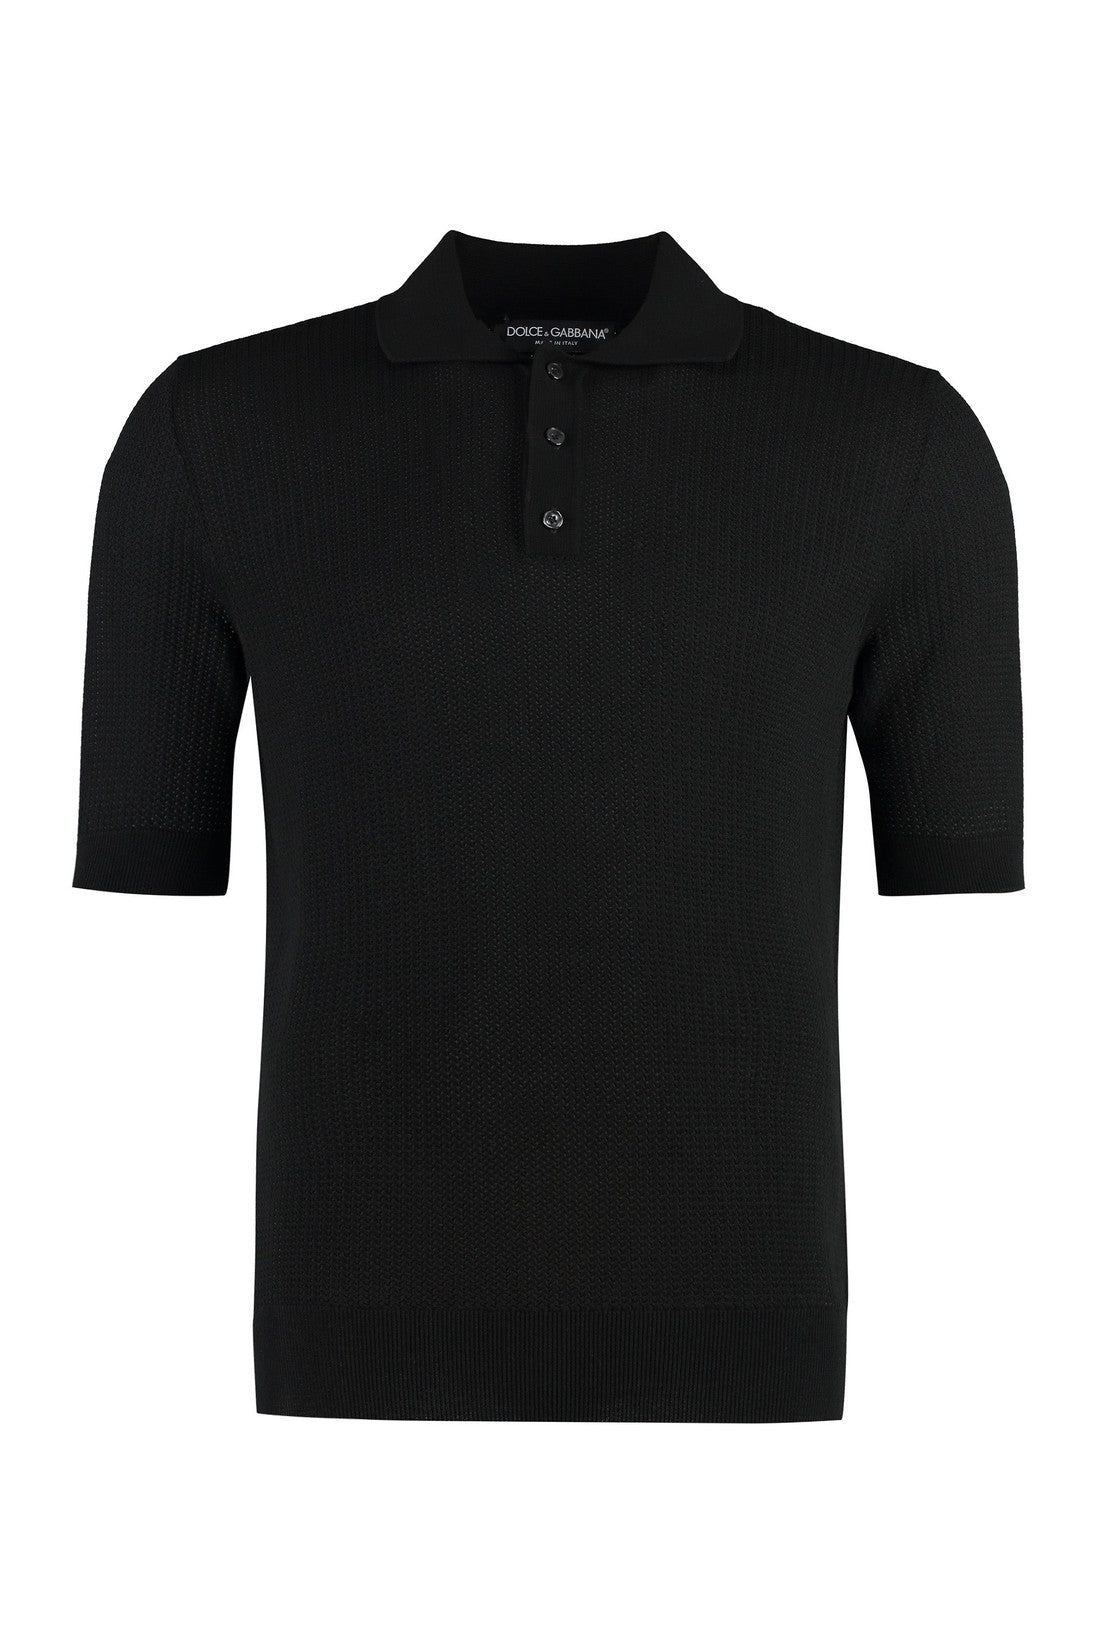 Dolce & Gabbana-OUTLET-SALE-Knitted cotton polo shirt-ARCHIVIST